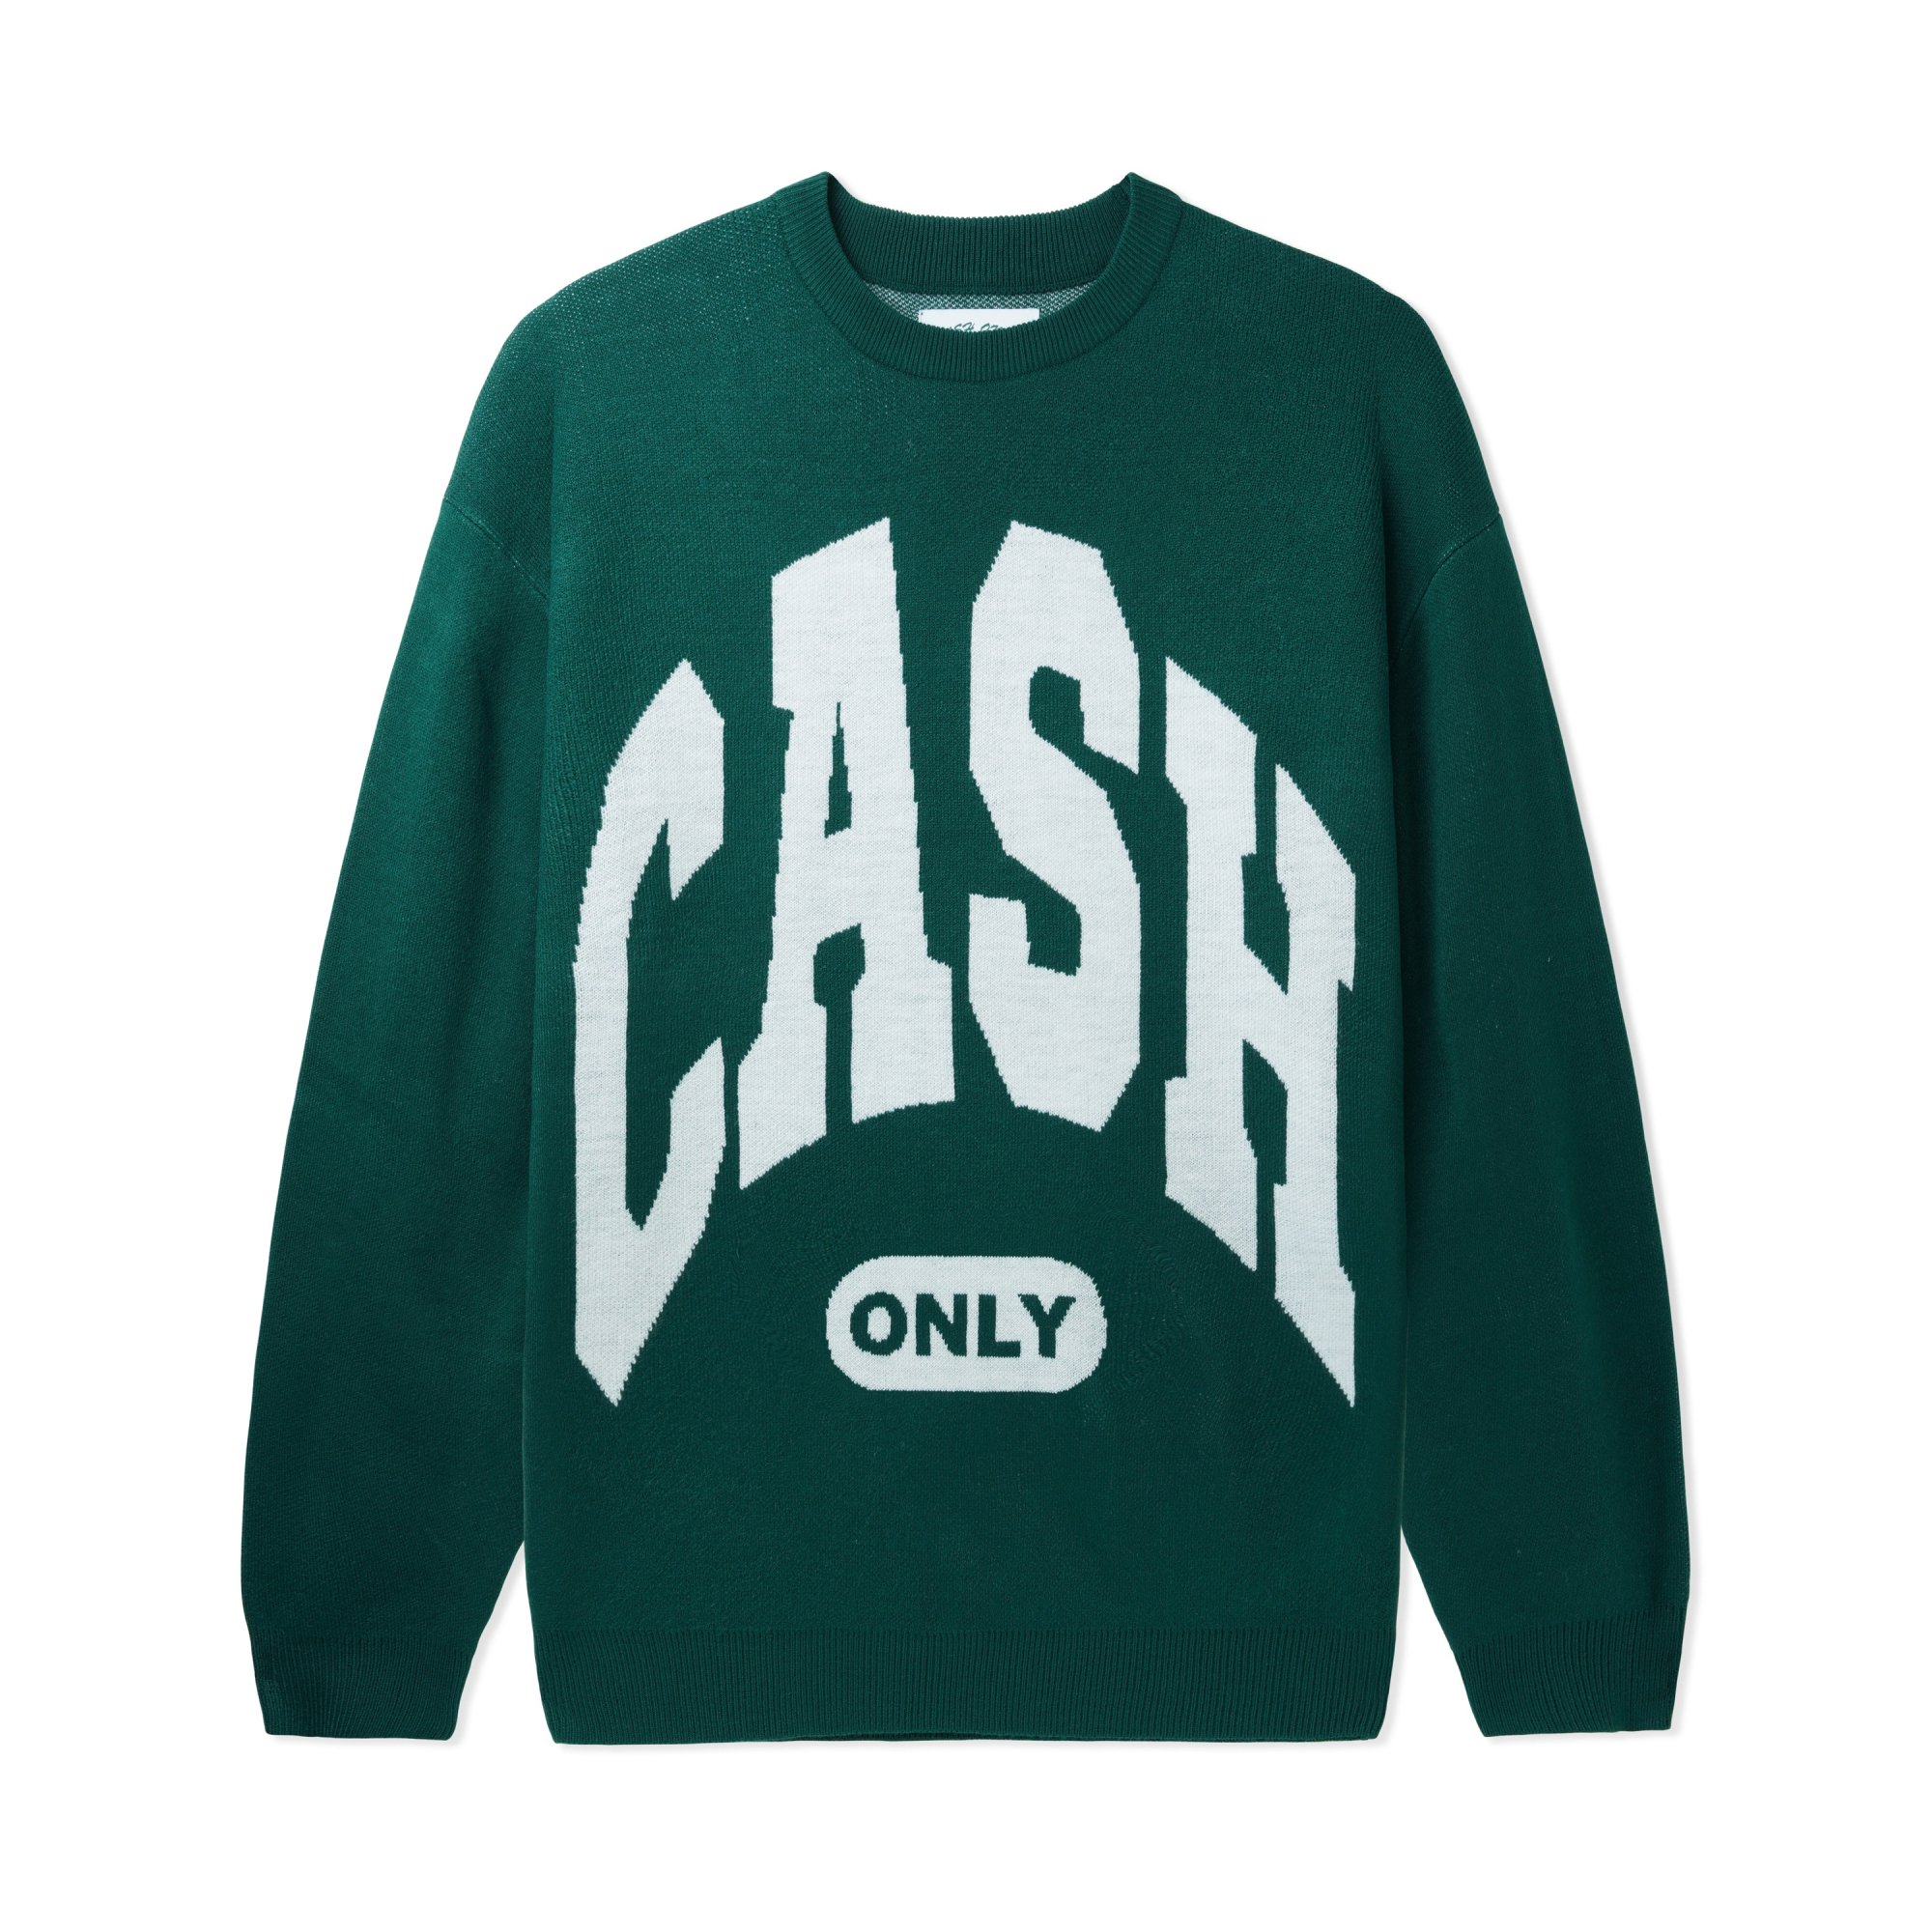 Cash Only<br>COLLEGE KNITTED SWEATER<br>